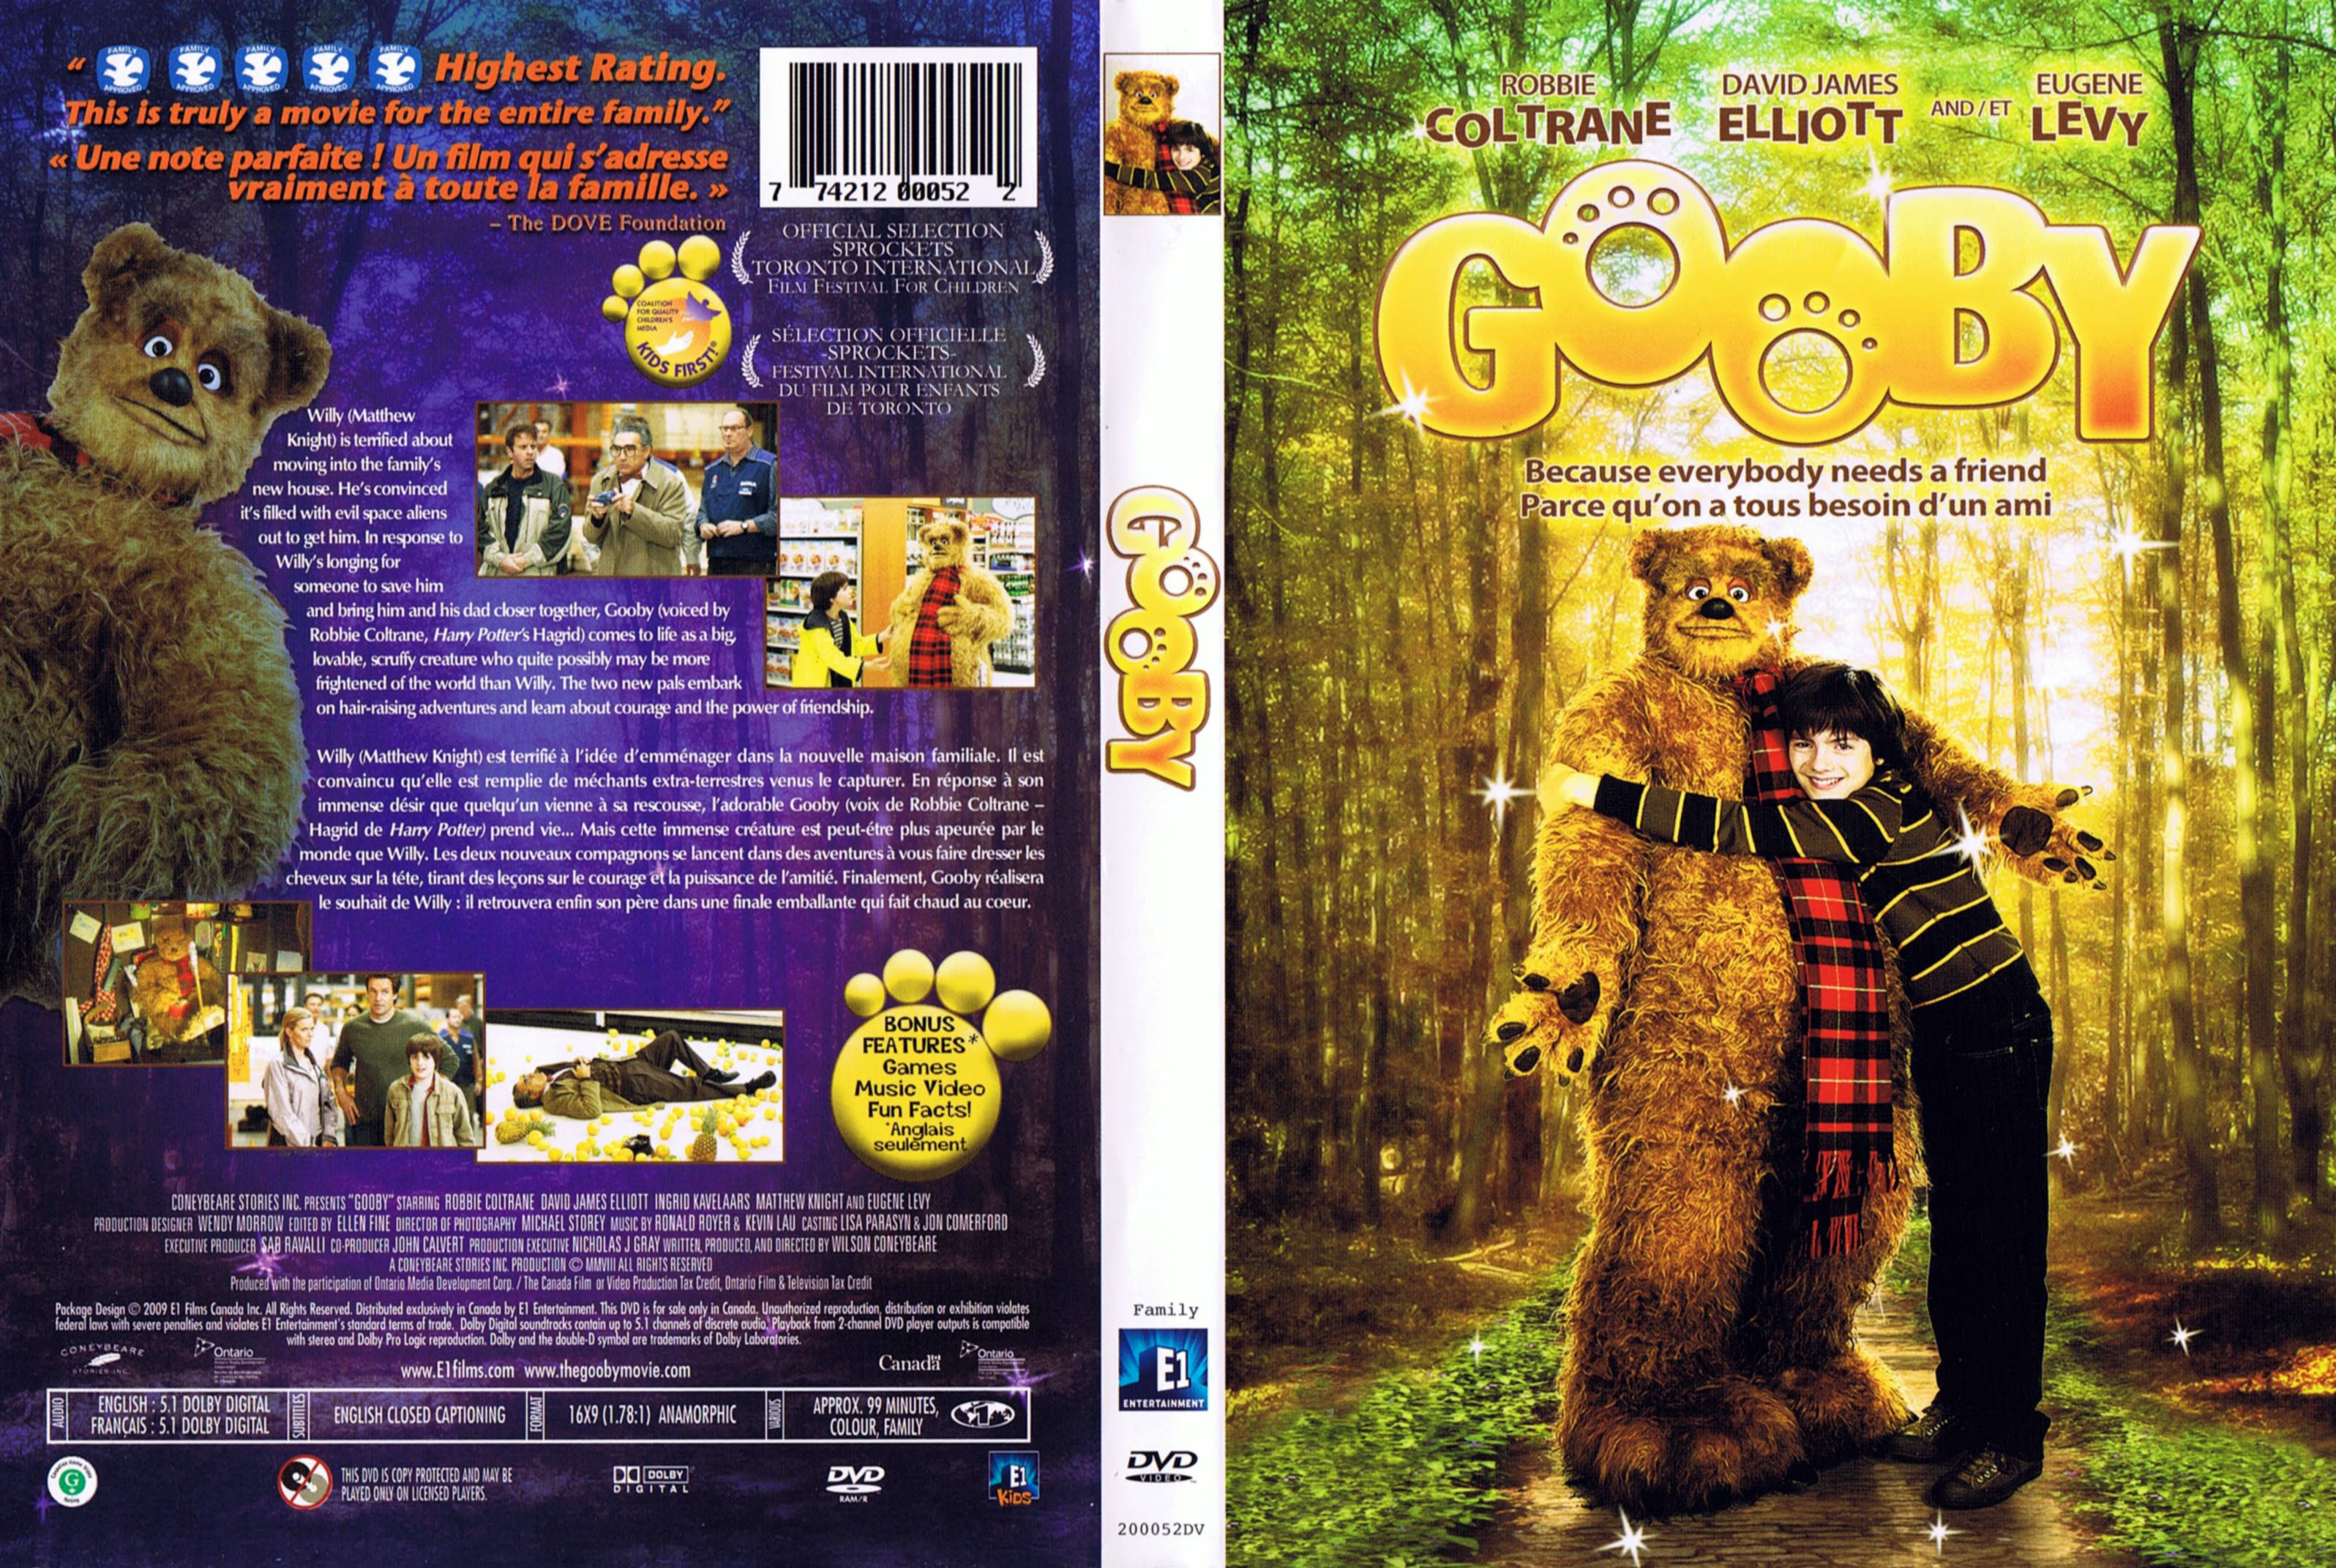 Jaquette DVD Gooby (Canadienne)